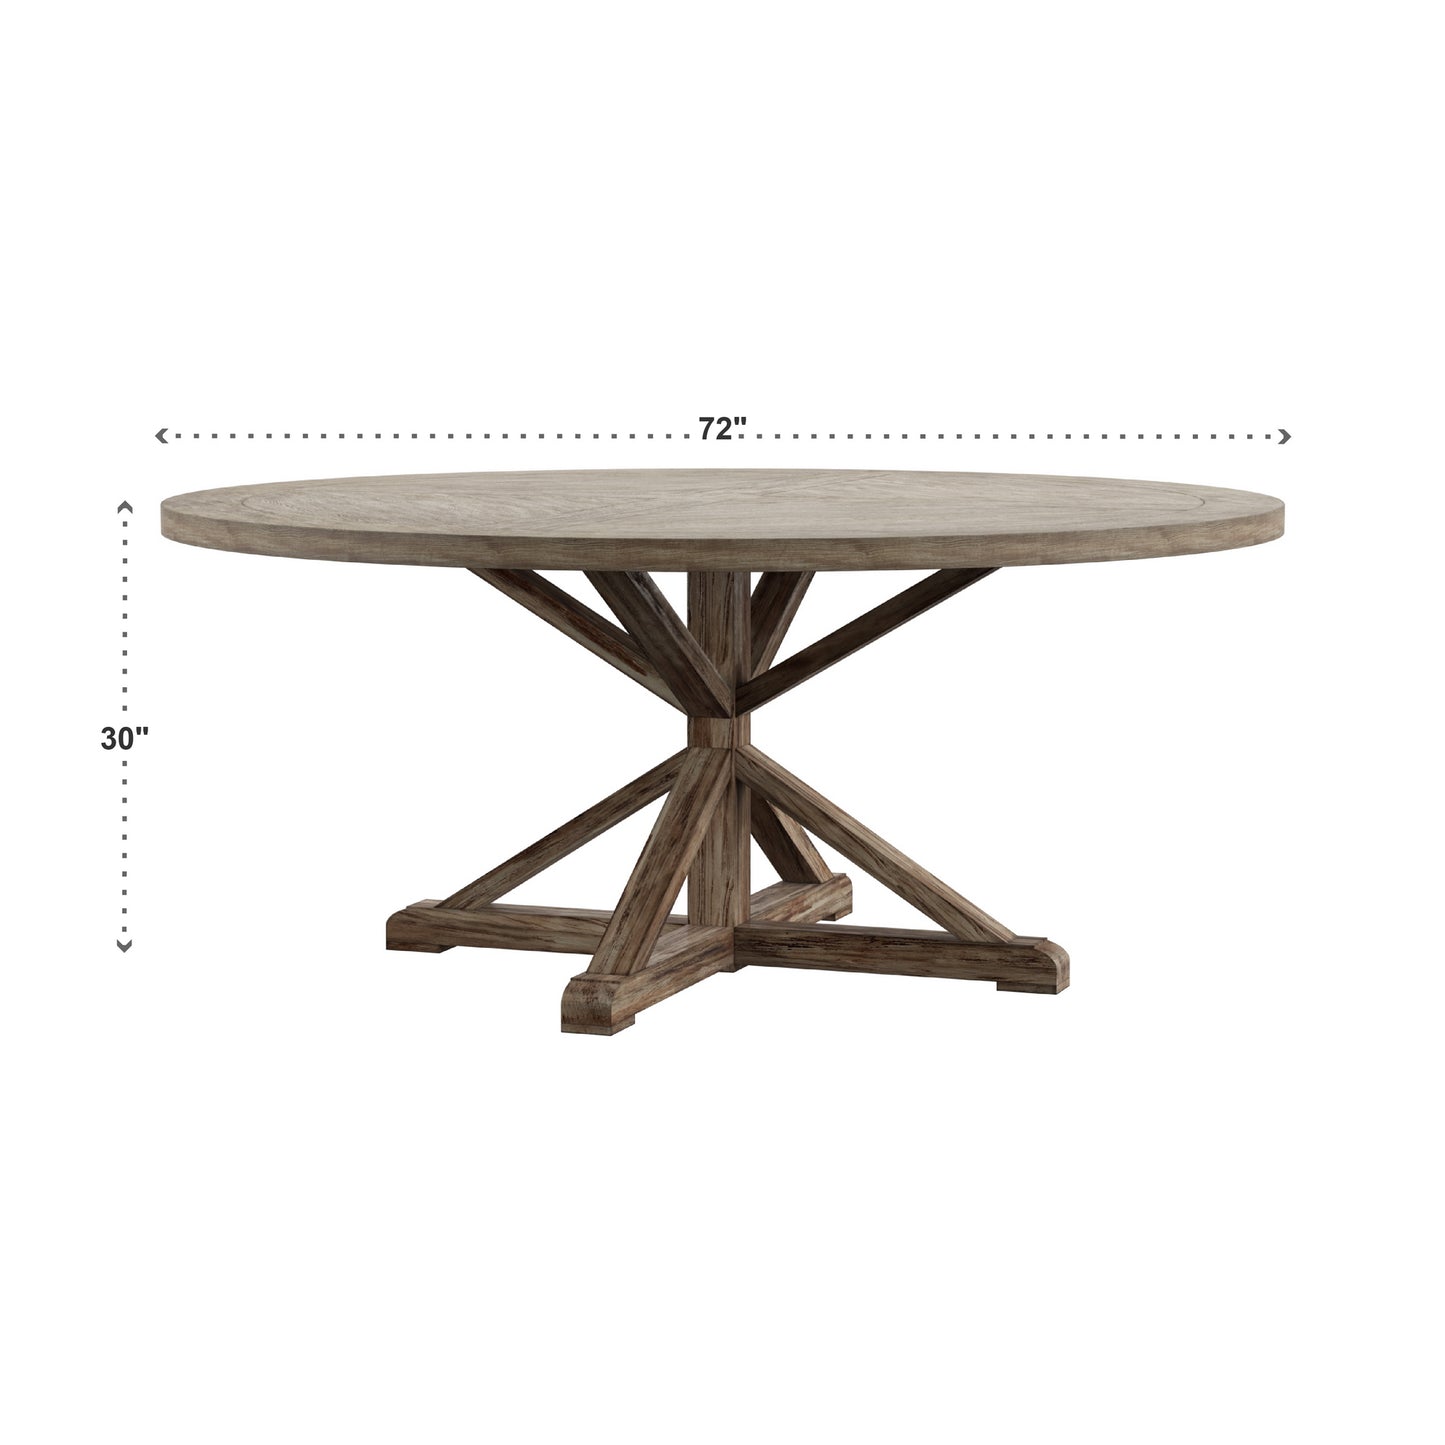 Rustic X-Base Round Pine Wood Dining Table - Antique Grey Finish, 72-inch